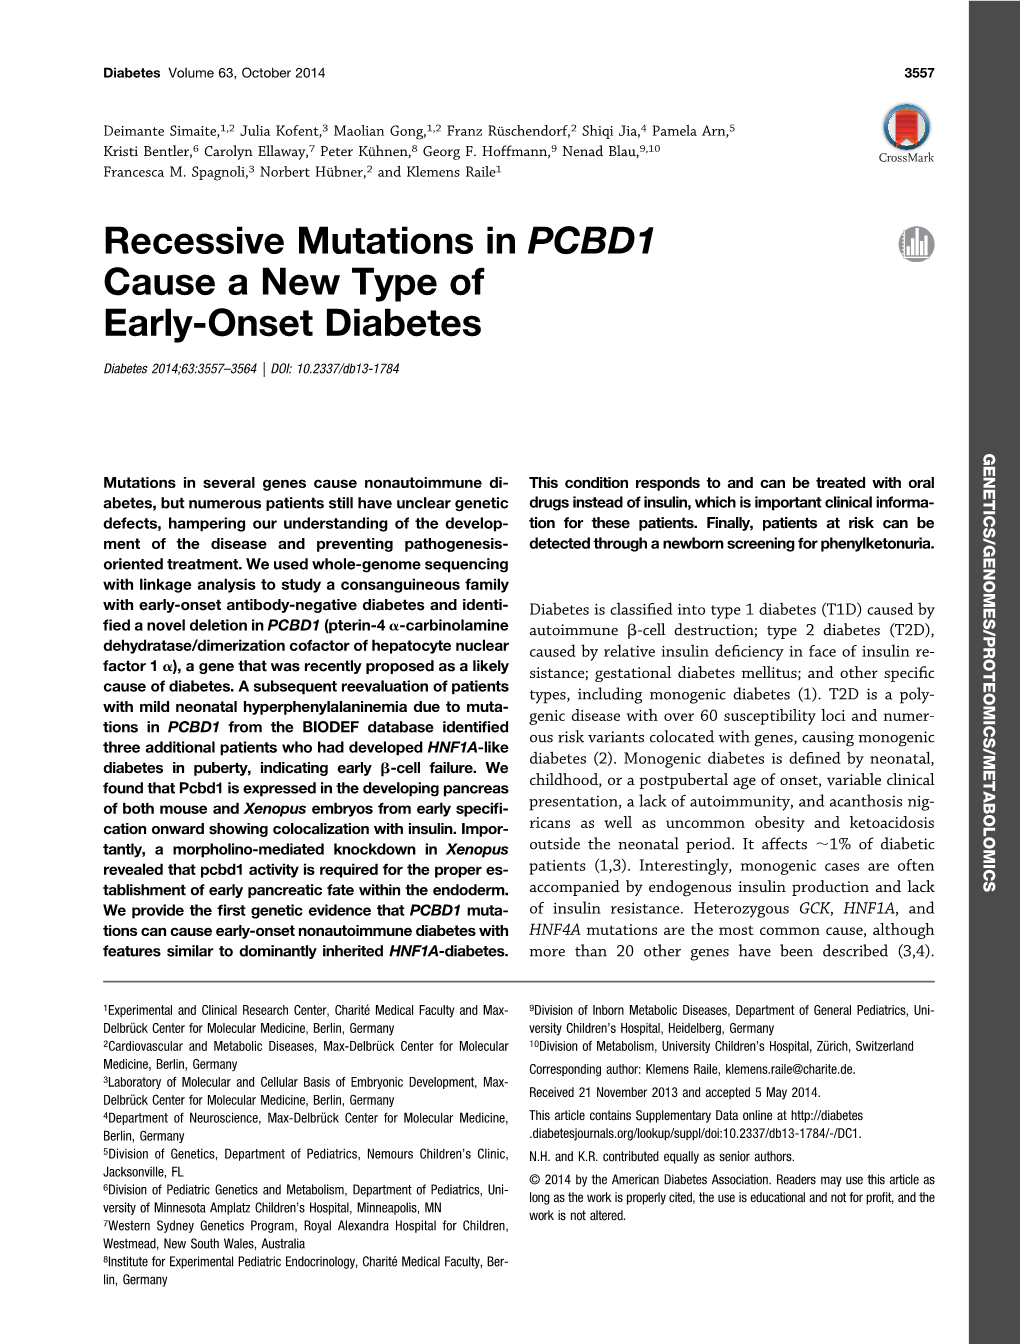 Recessive Mutations in PCBD1 Cause a New Type of Early-Onset Diabetes